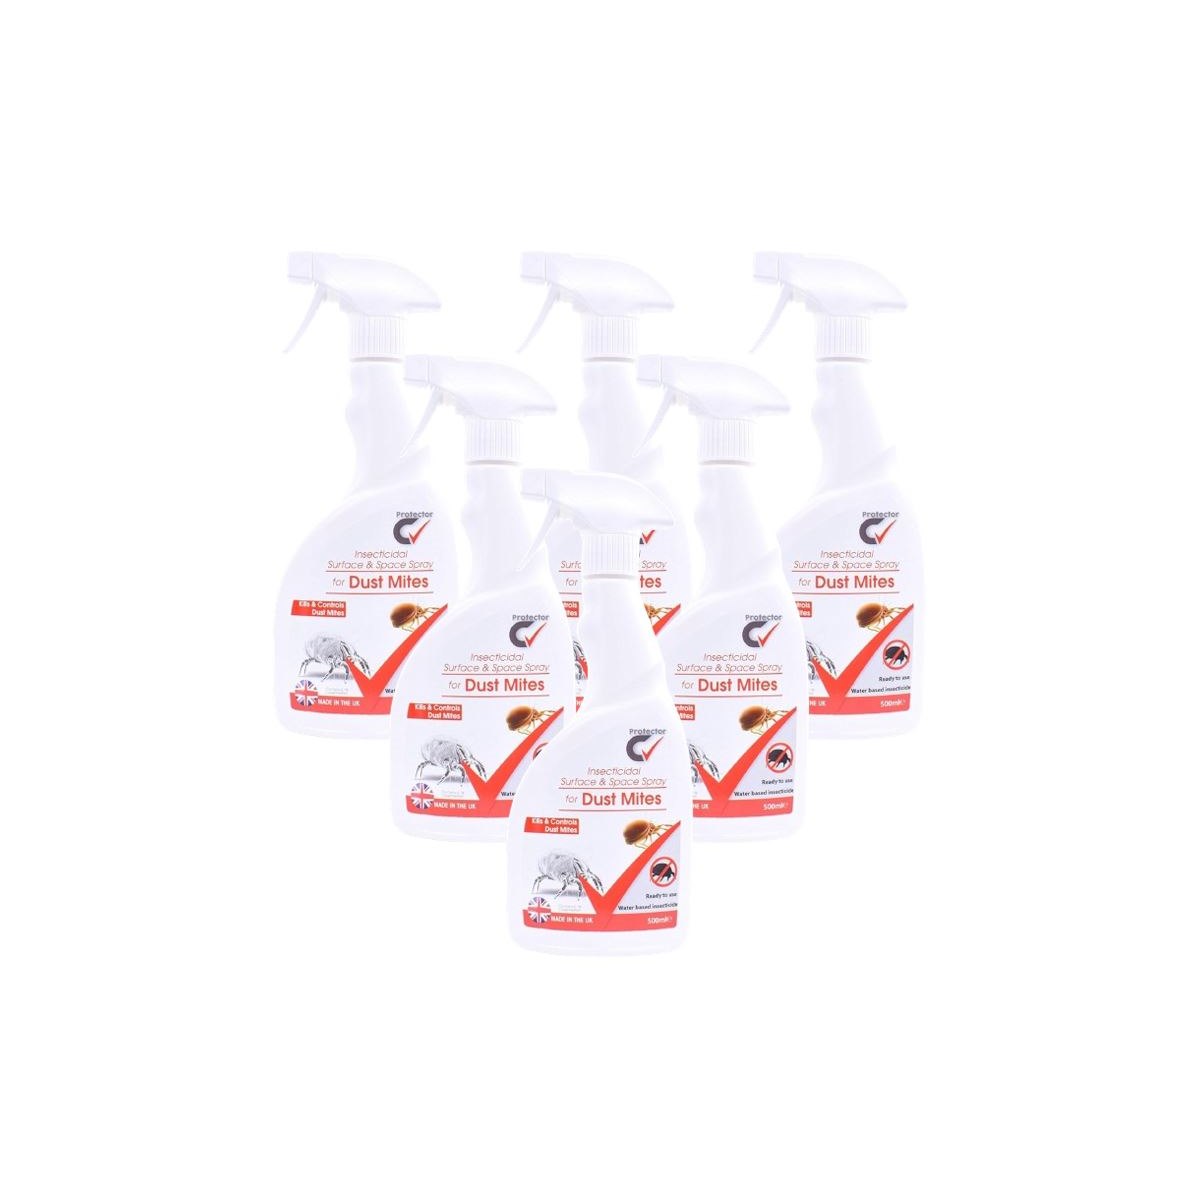 Case of 6 x Protector C Insecticidal Spray For Dust Mites 500ml